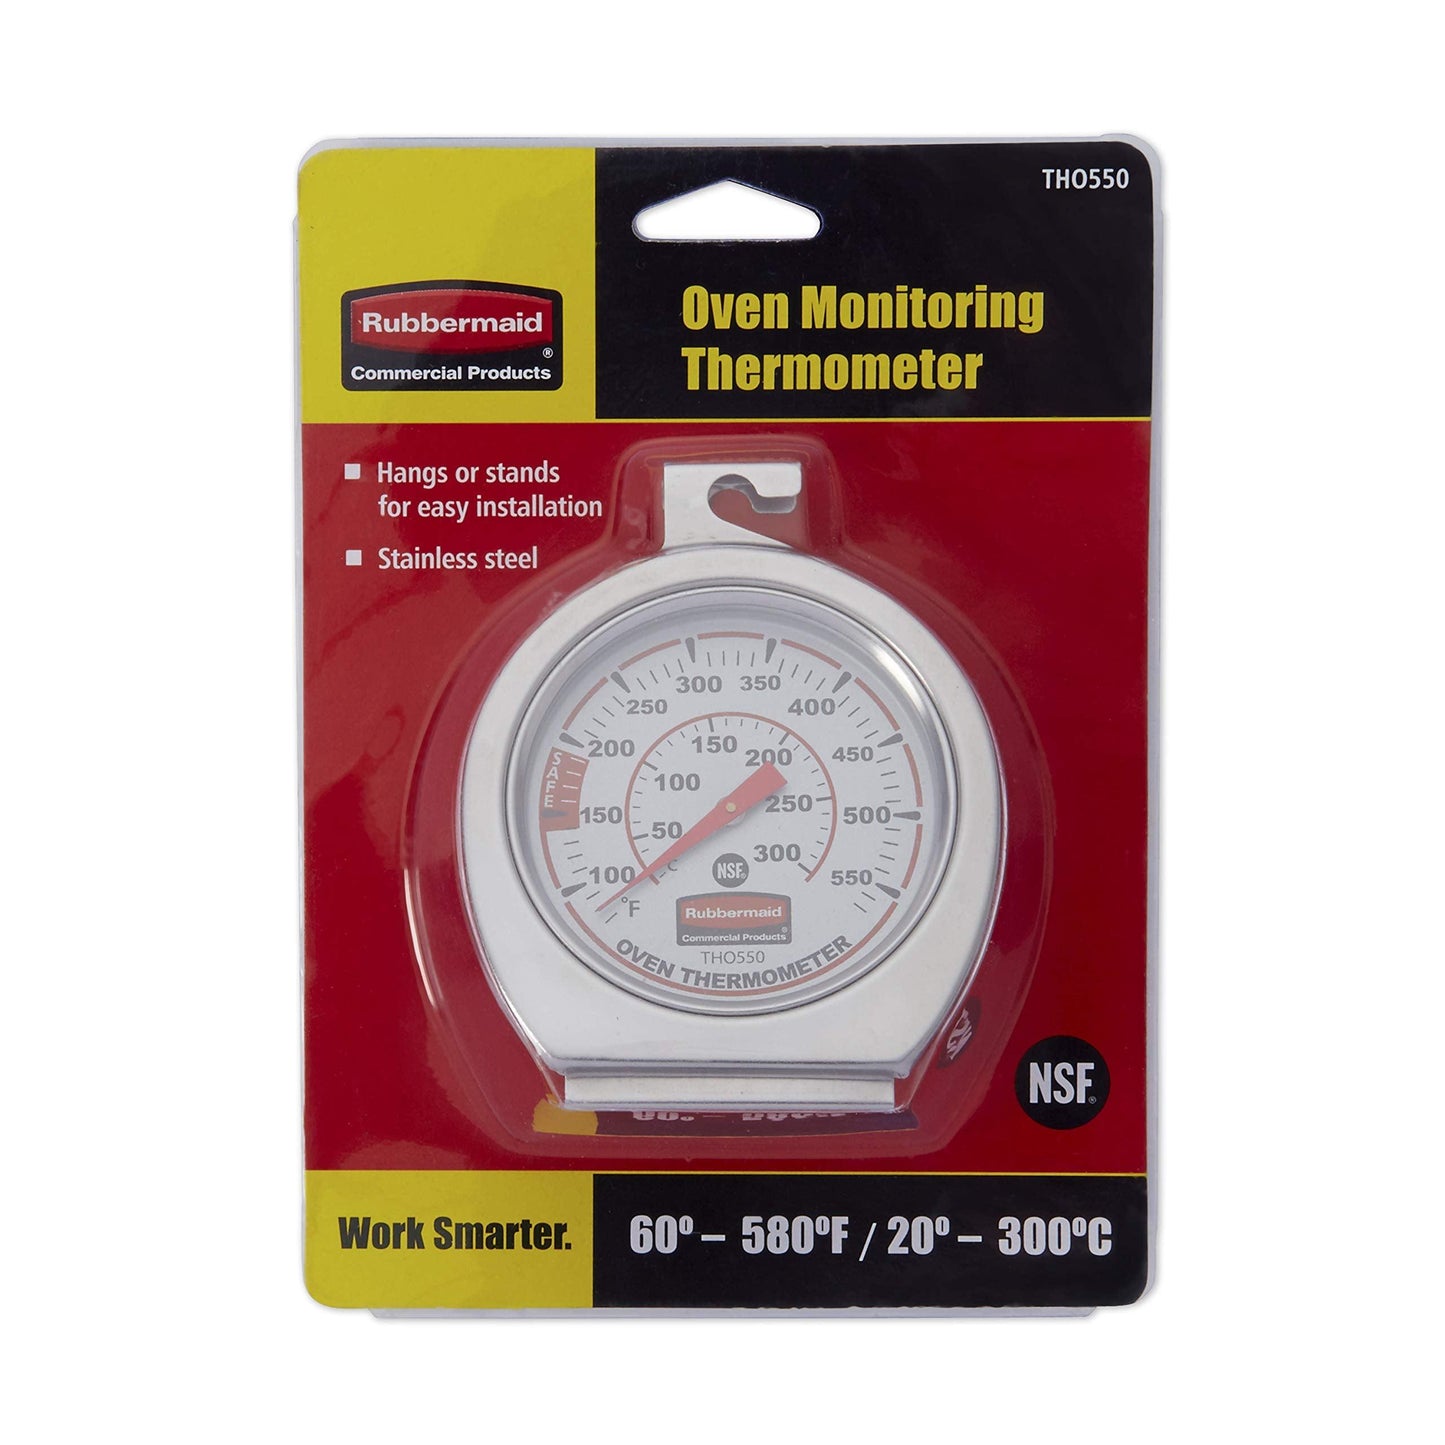 Rubbermaid Commercial Products Stainless Steel Monitoring Thermometer for Oven/Grill/Meat/Food, 60-580 Degrees Fahrenheit Temperature Range, Easy to Read Food Thermometer For Cooking - CookCave